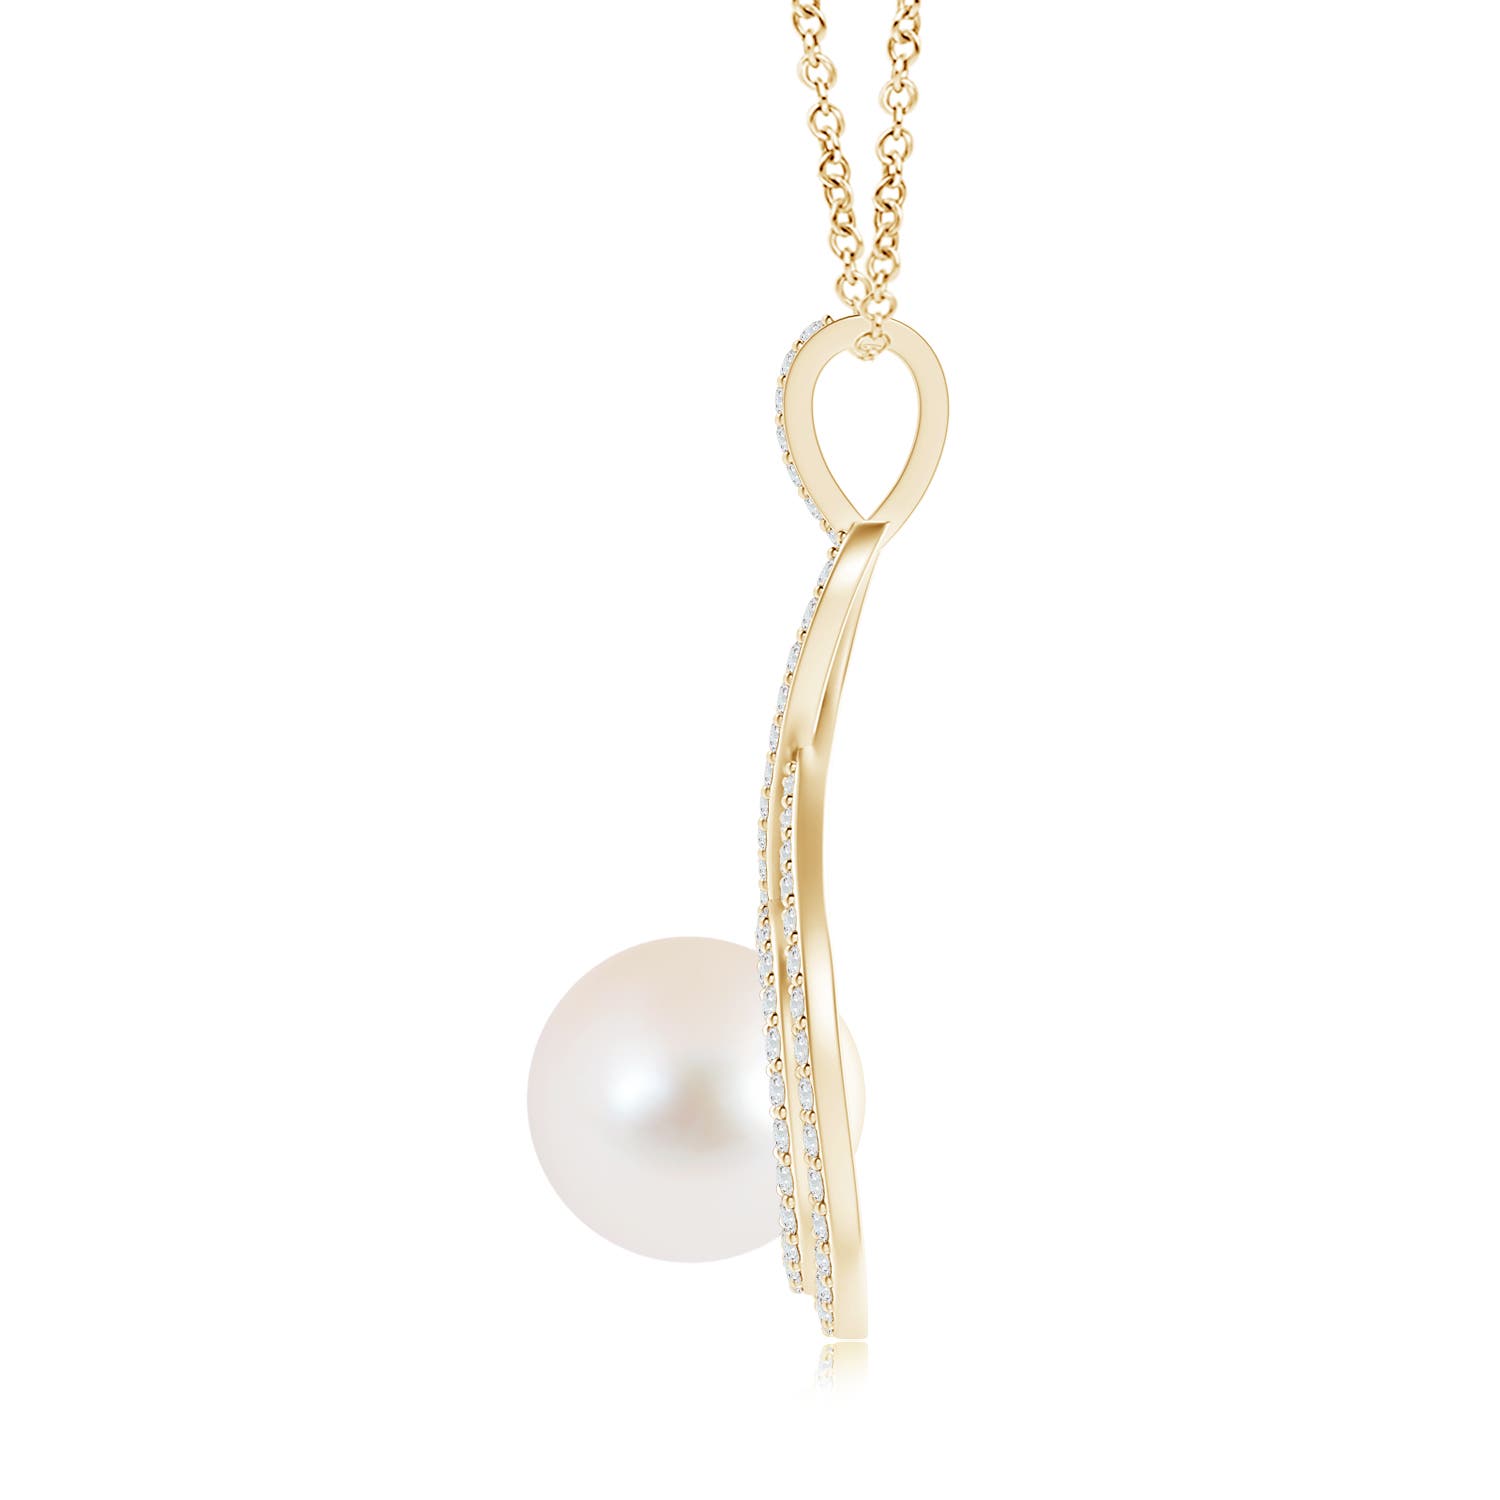 AAA - Freshwater Cultured Pearl / 7.79 CT / 14 KT Yellow Gold